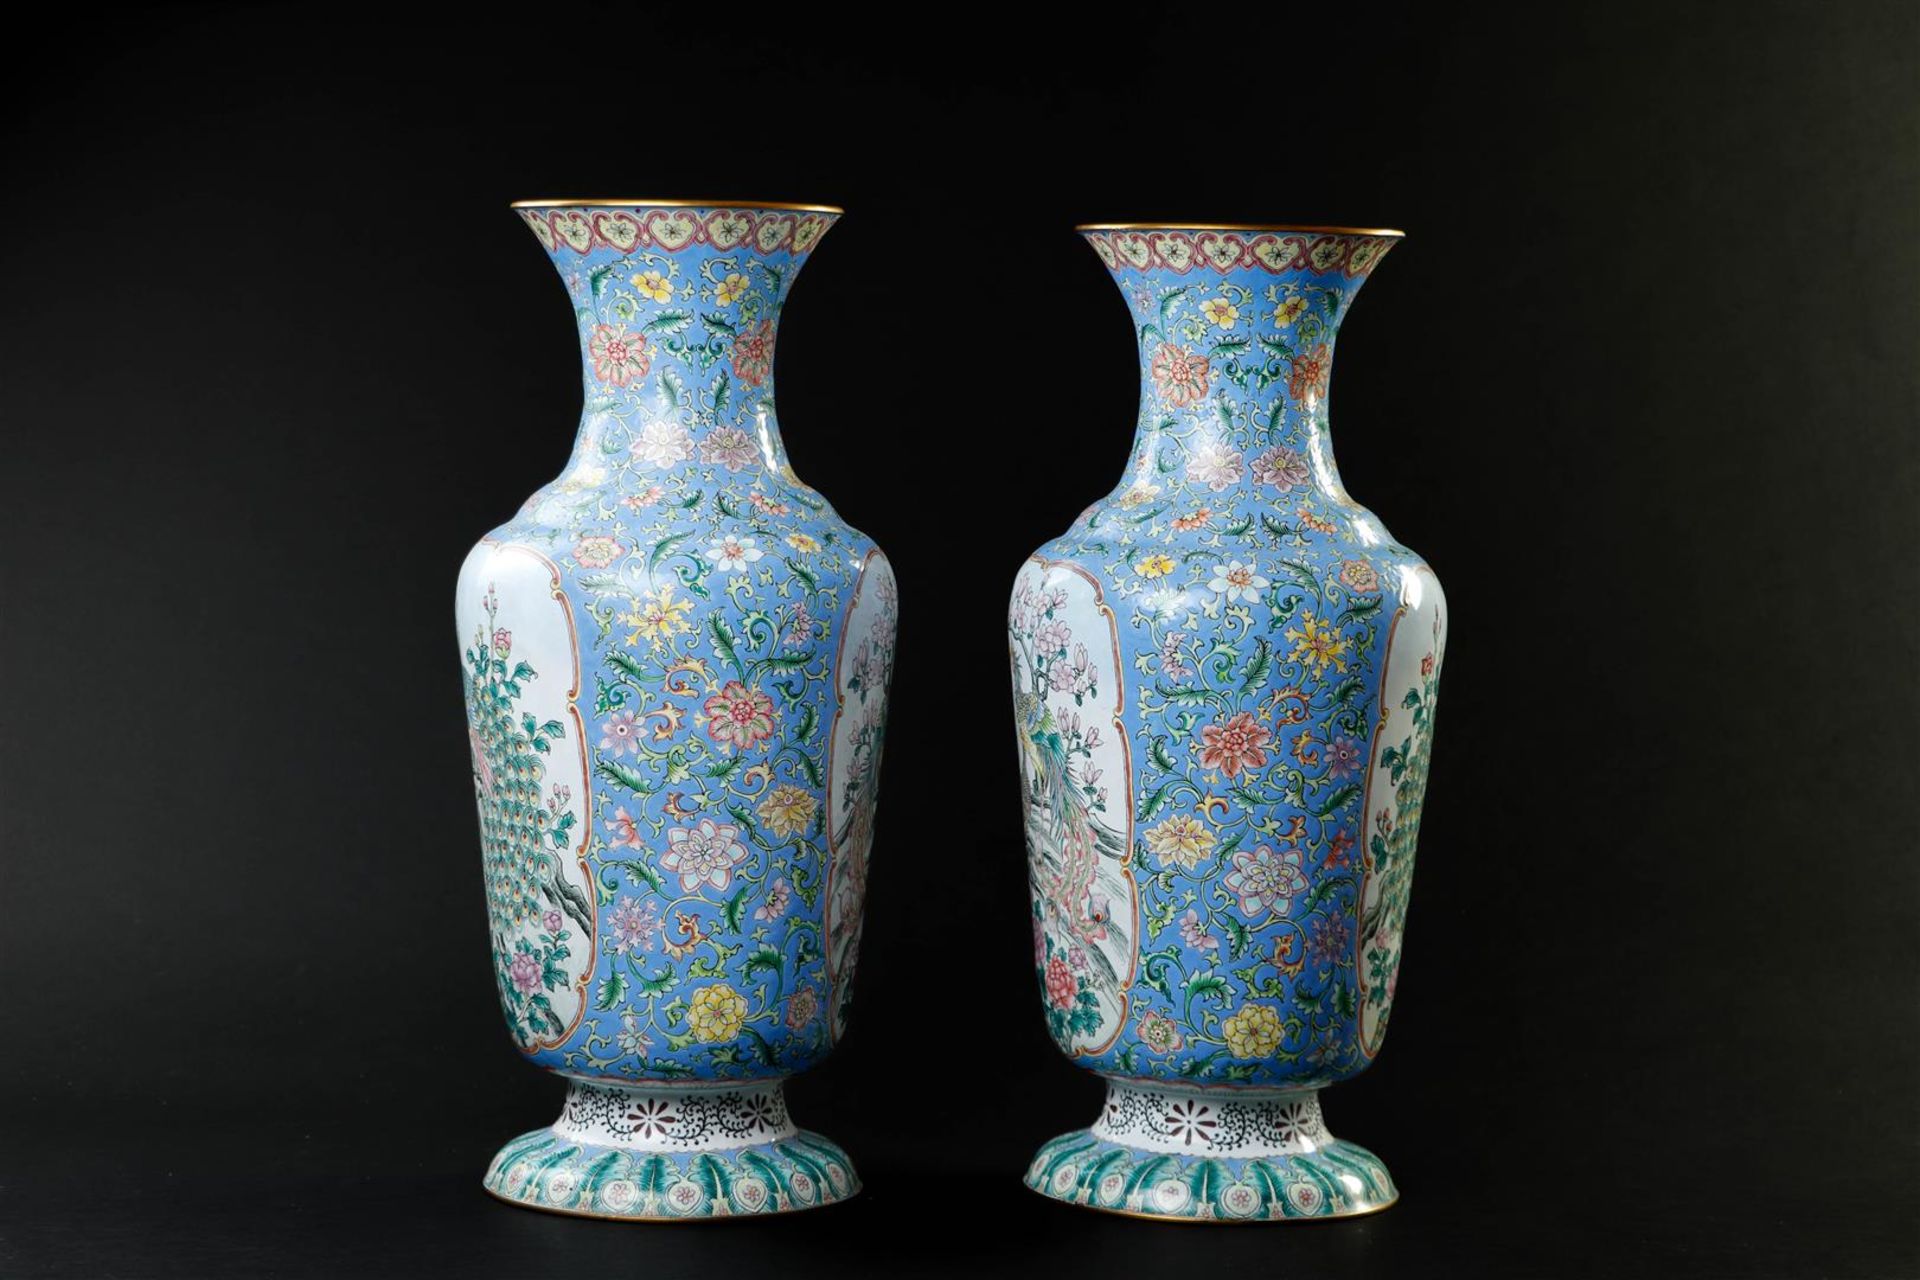 A pair of enamel famille rose vases depicting peacocks. China, 20th century.
H. 44 cm. - Image 4 of 6